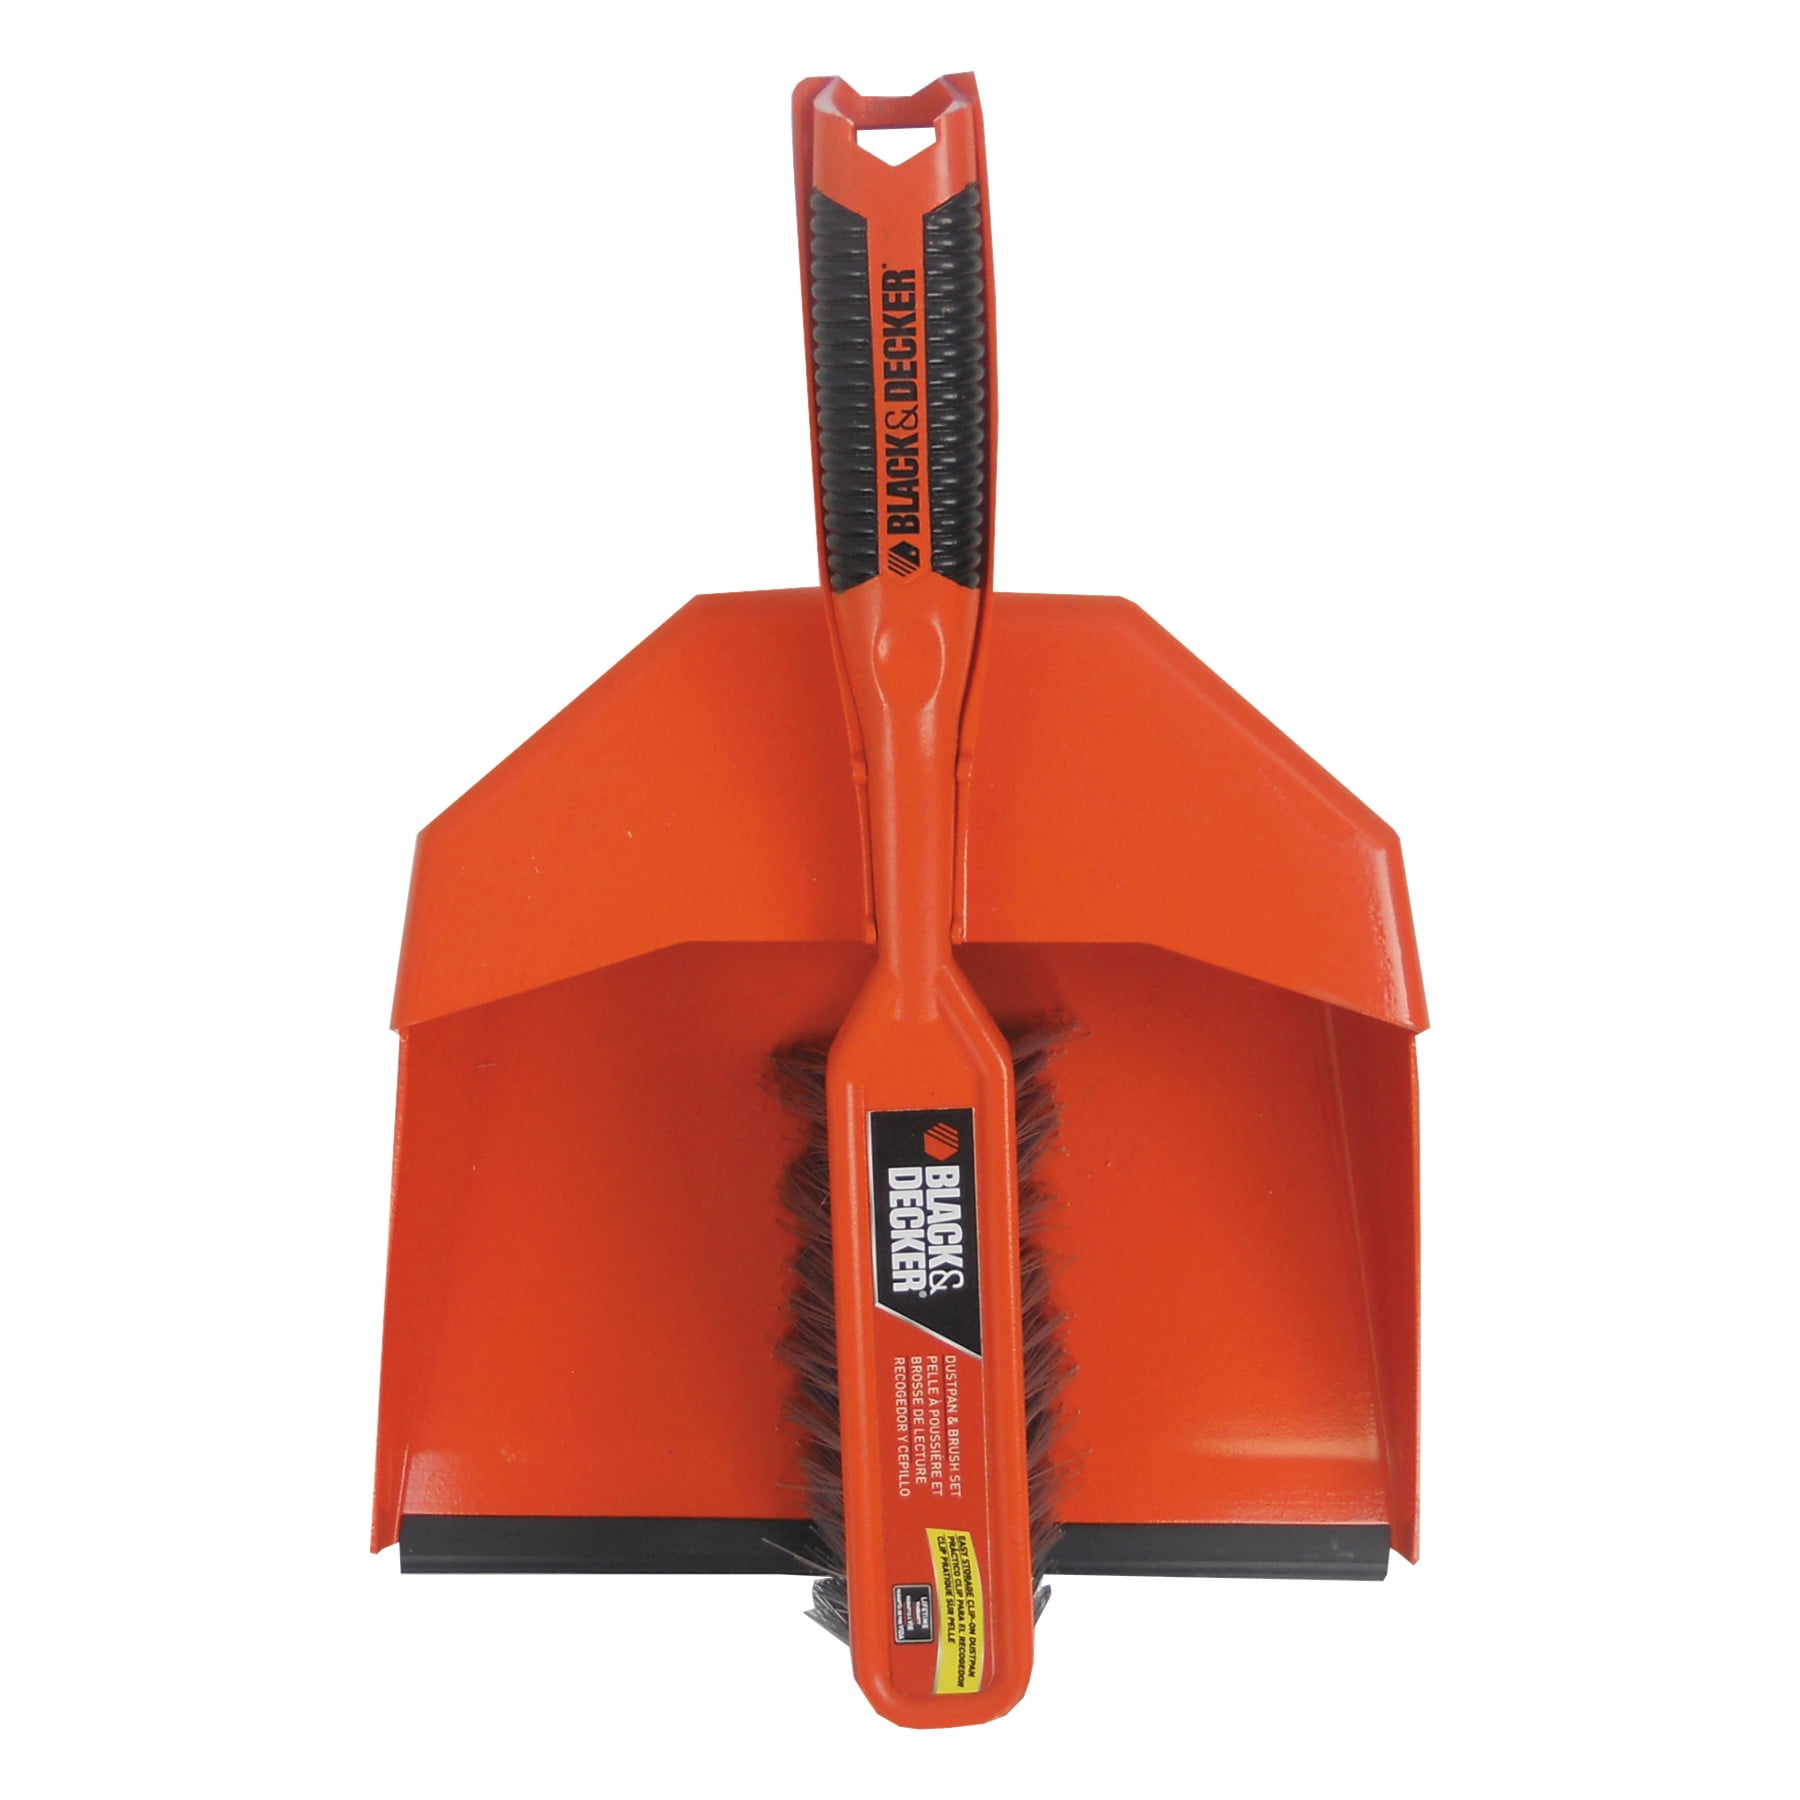 Rubbermaid Dustpan And Brush Set - Total Qty: 6 402ZQK